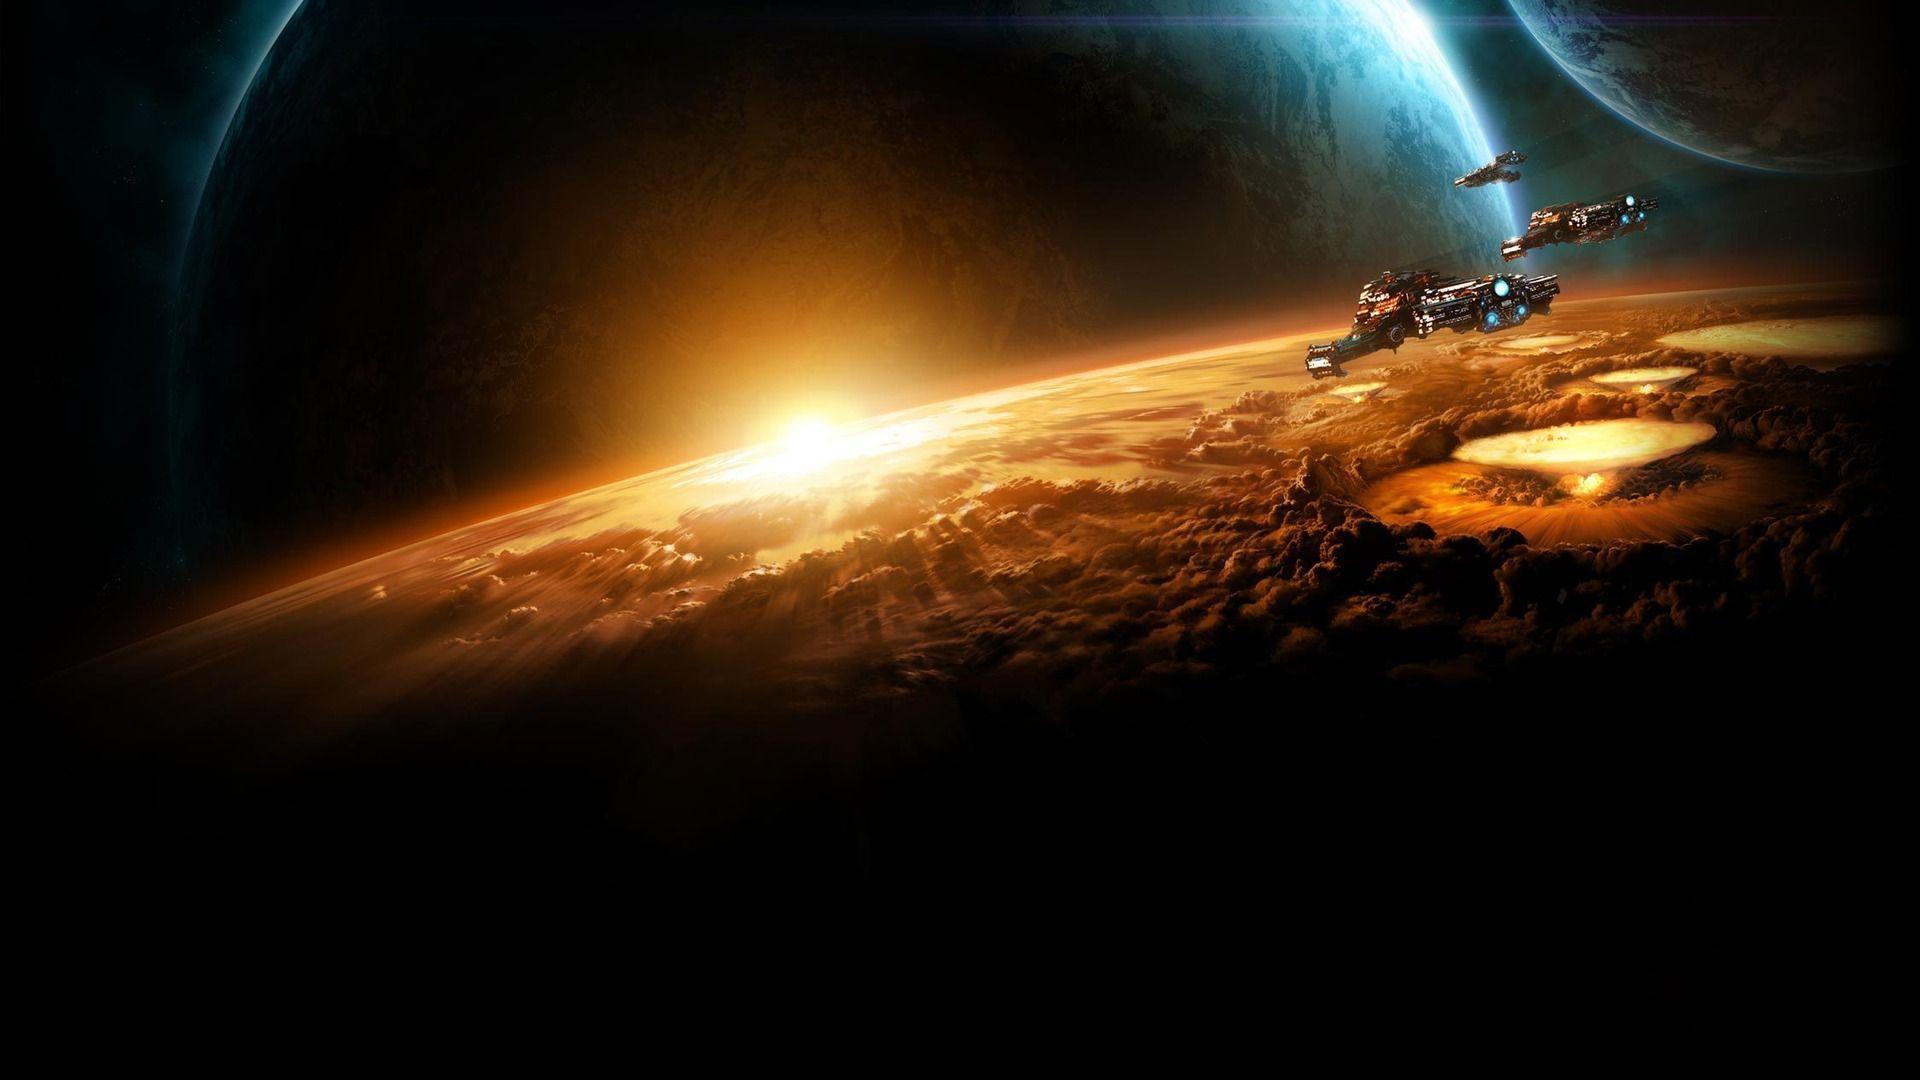 Wallpapers For > Space Desktop Backgrounds 1920x1080